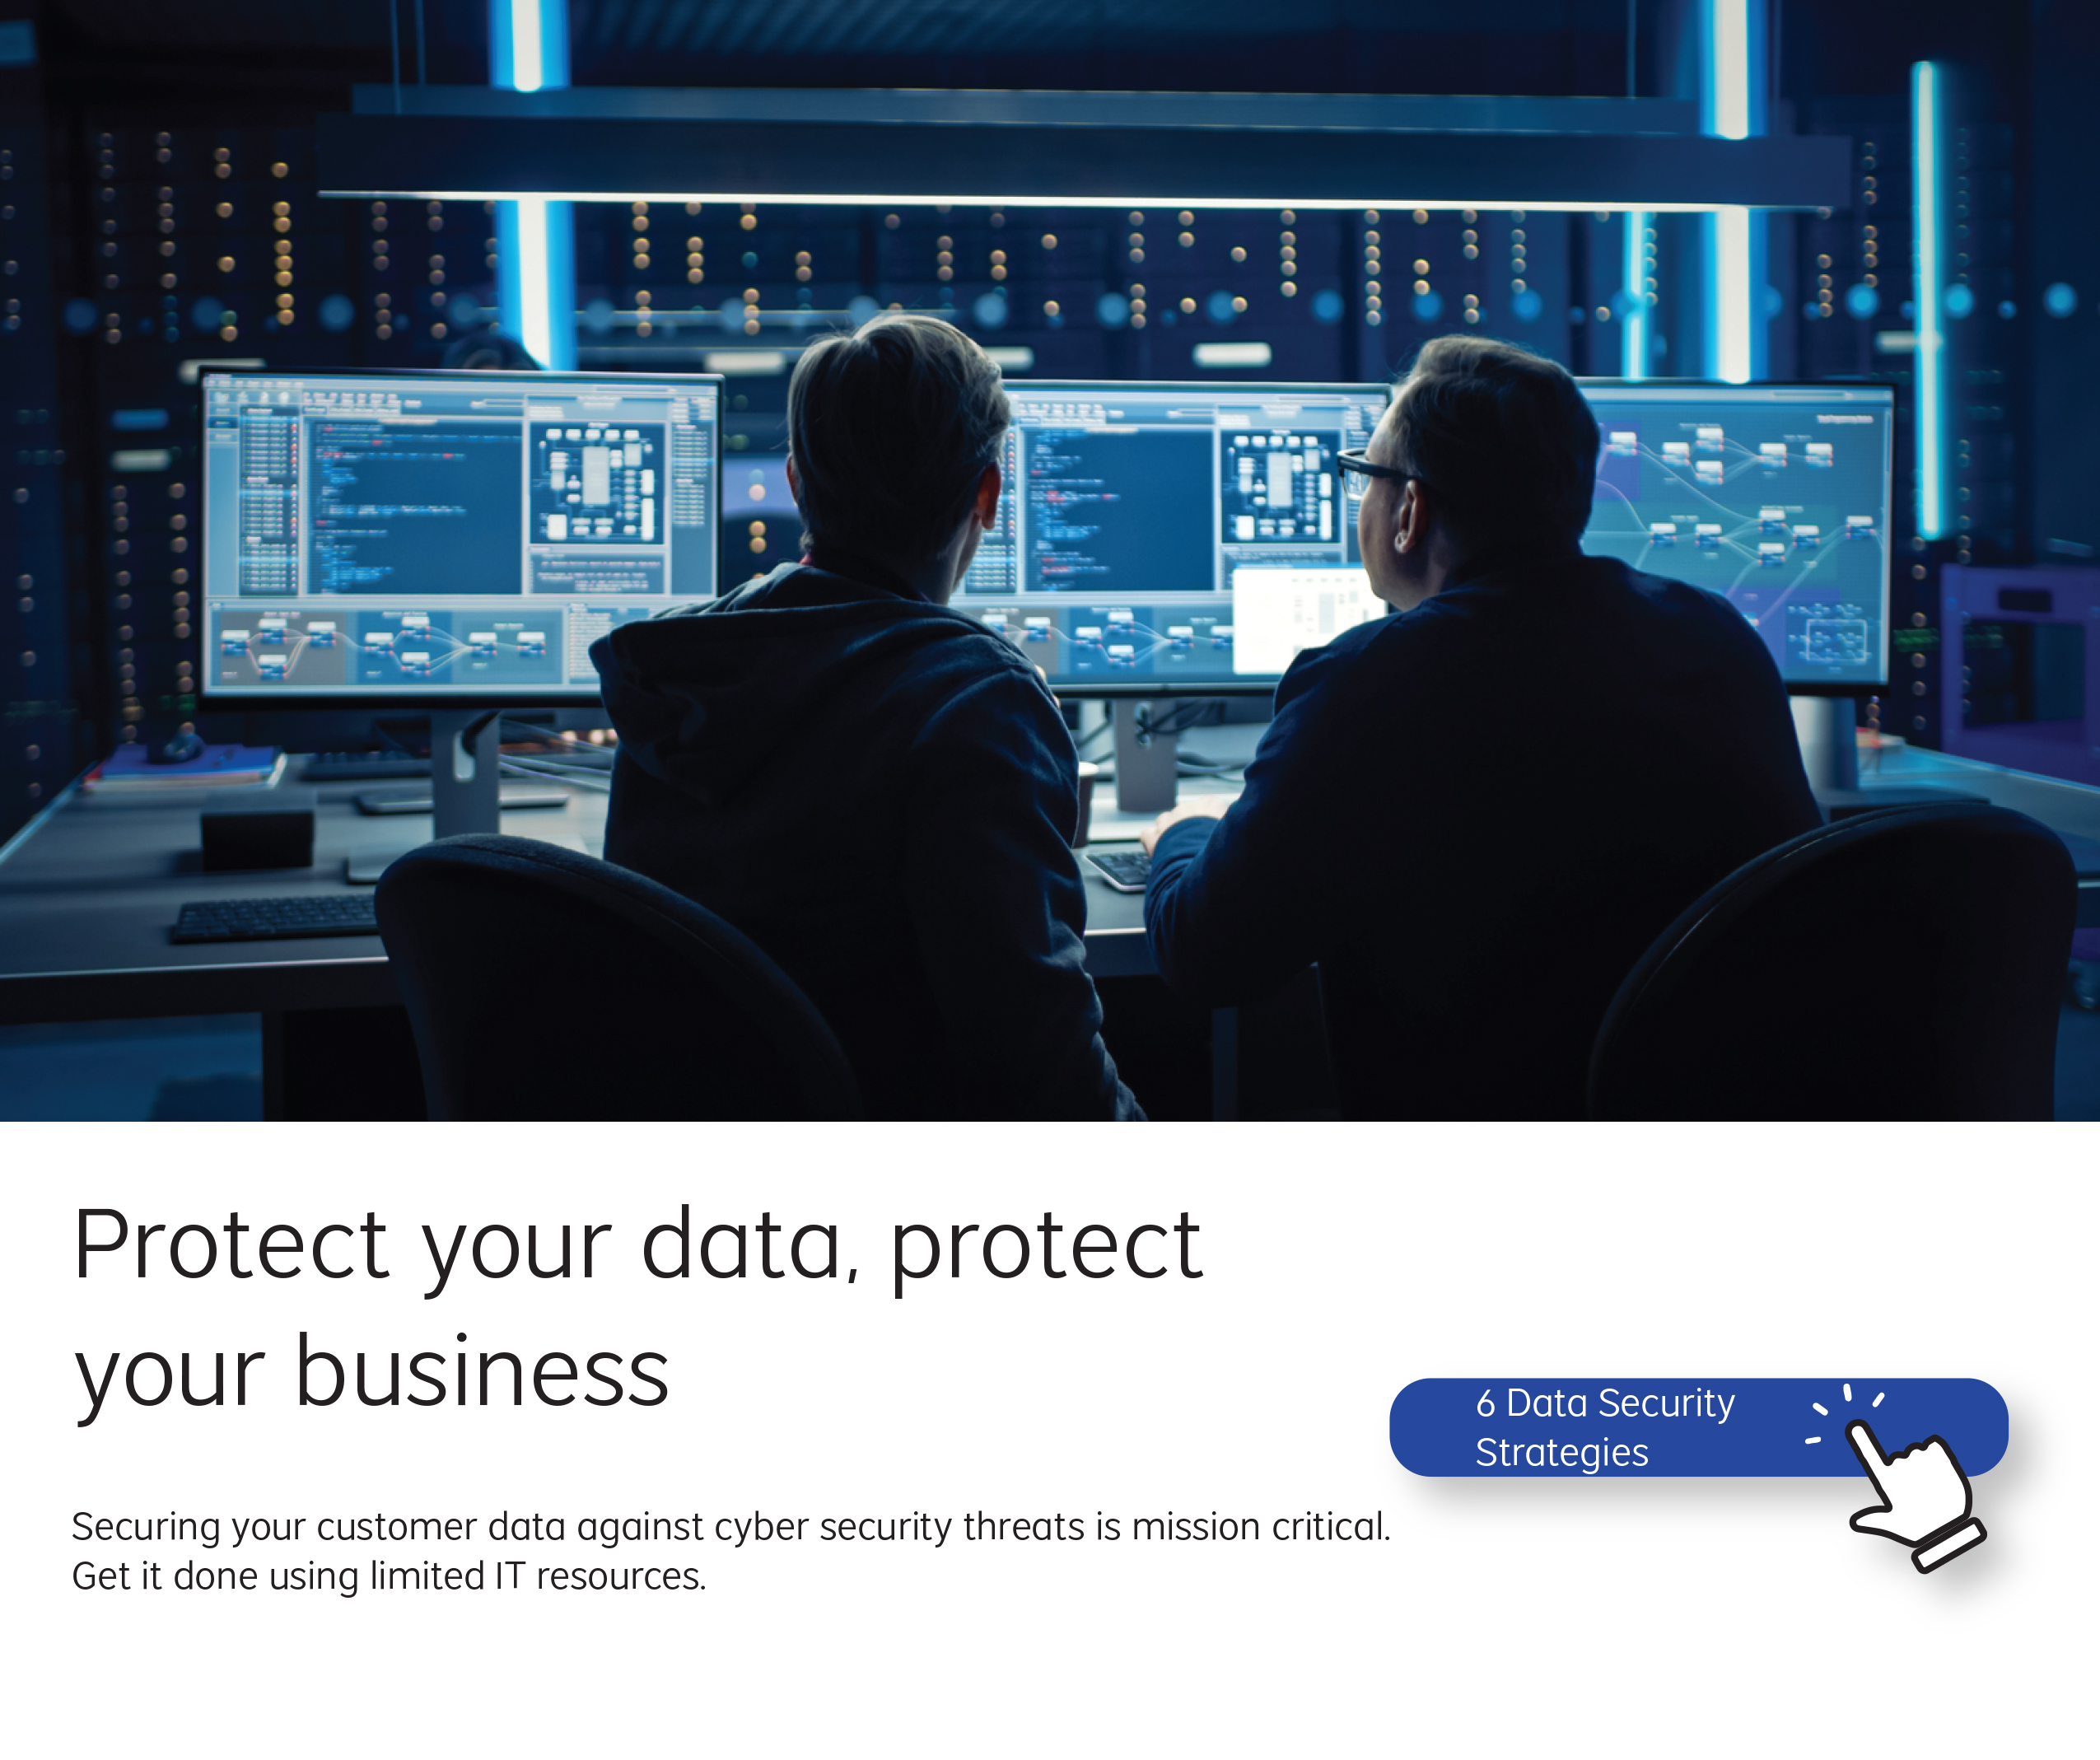 Protect your business by protecting your data